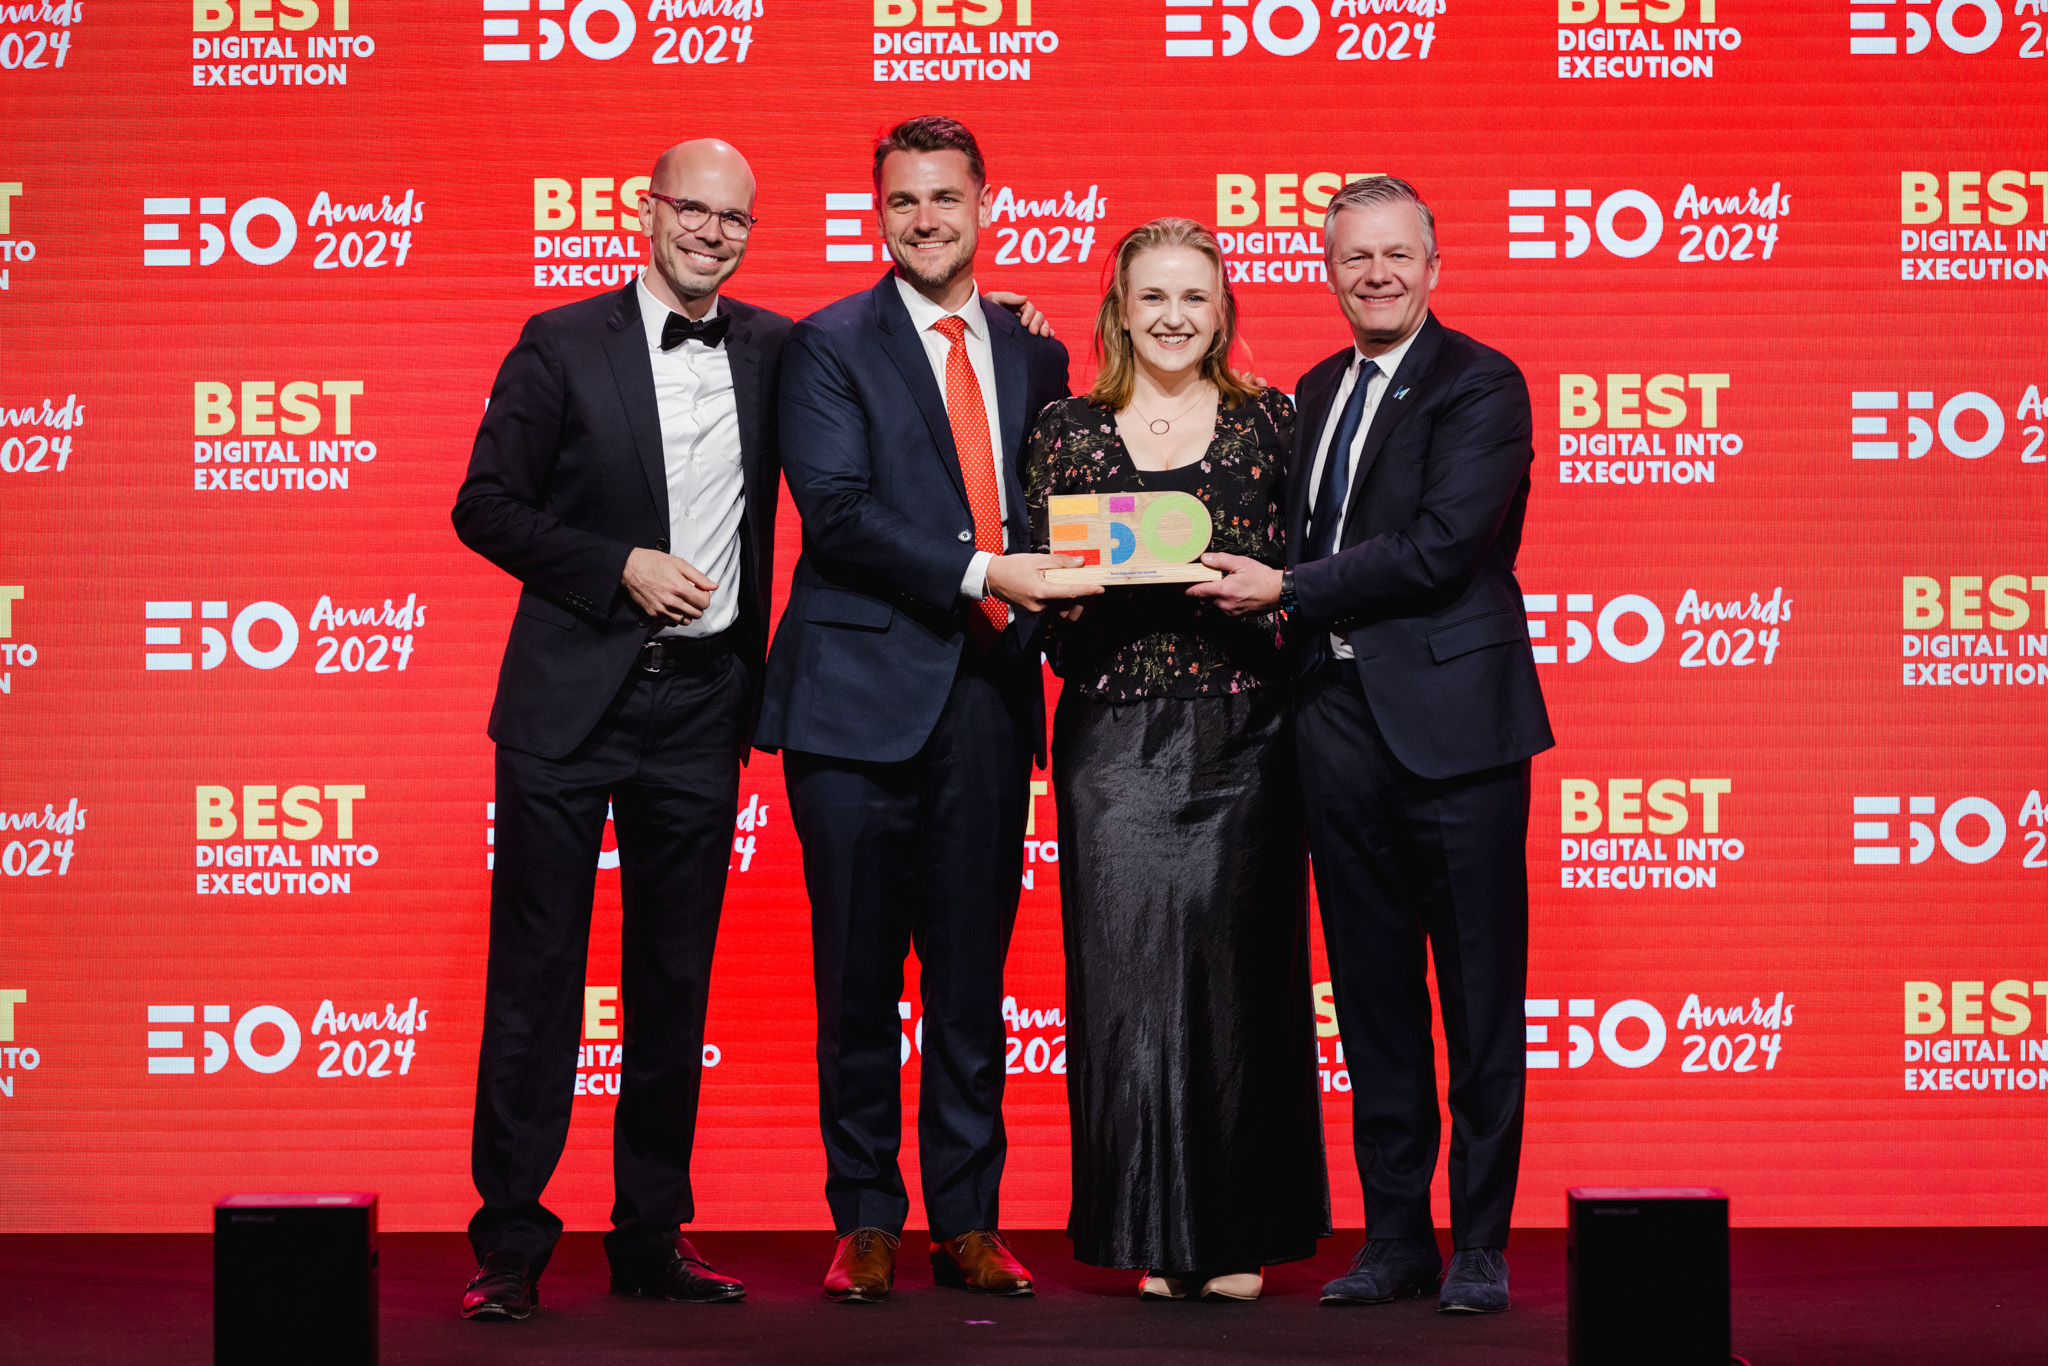 Four people in formal attire stand on stage, smiling and holding an award in front of a red backdrop that reads "Best Digital Into Execution 2024 EO Awards," capturing a moment of corporate photography excellence.